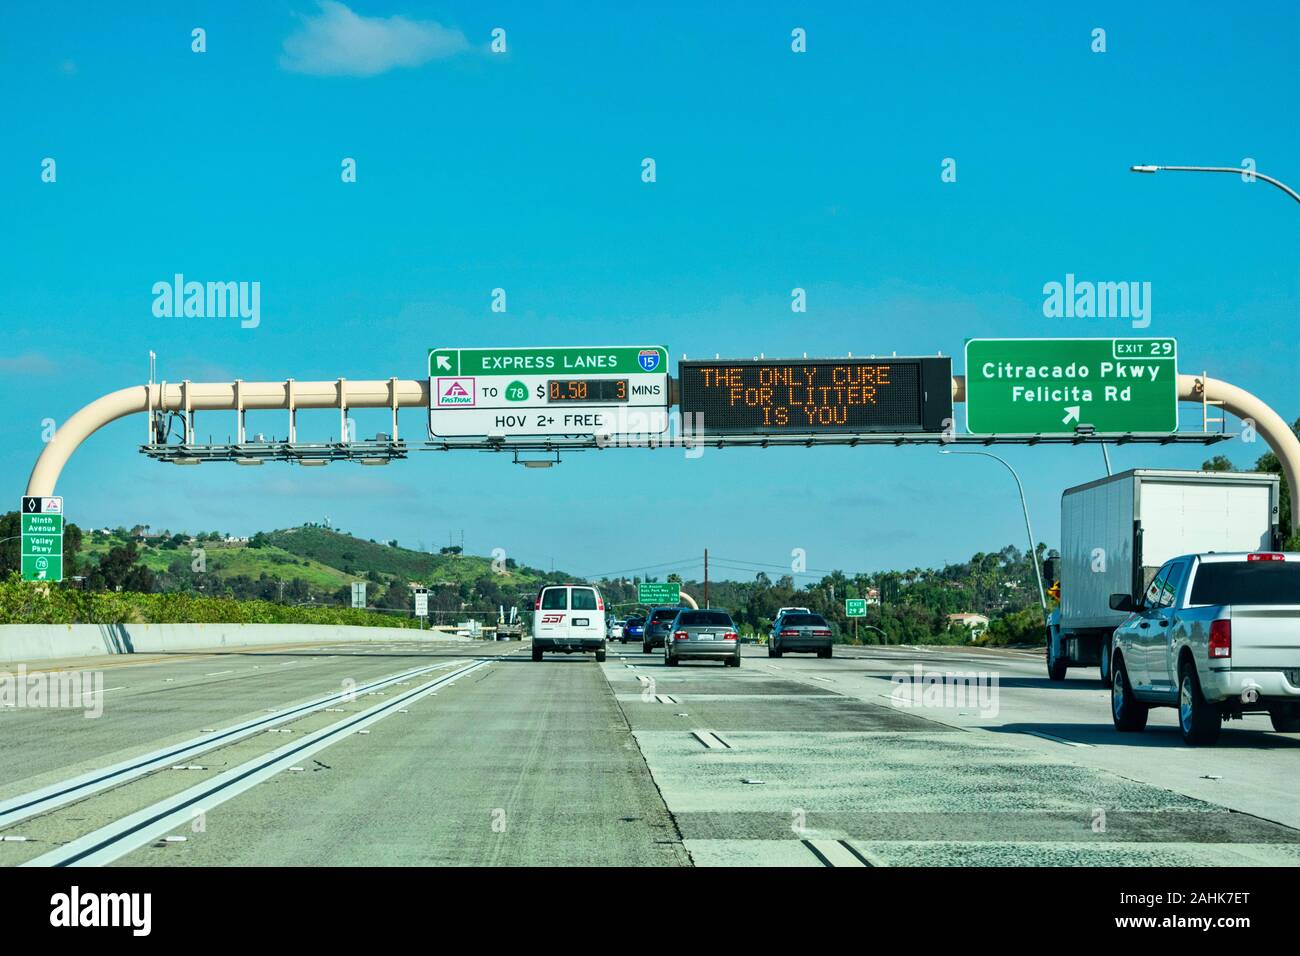 Express lanes marked by large overhead signage with toll amount. The only cure for litter is you text on the electronic variable message sign - San Di Stock Photo